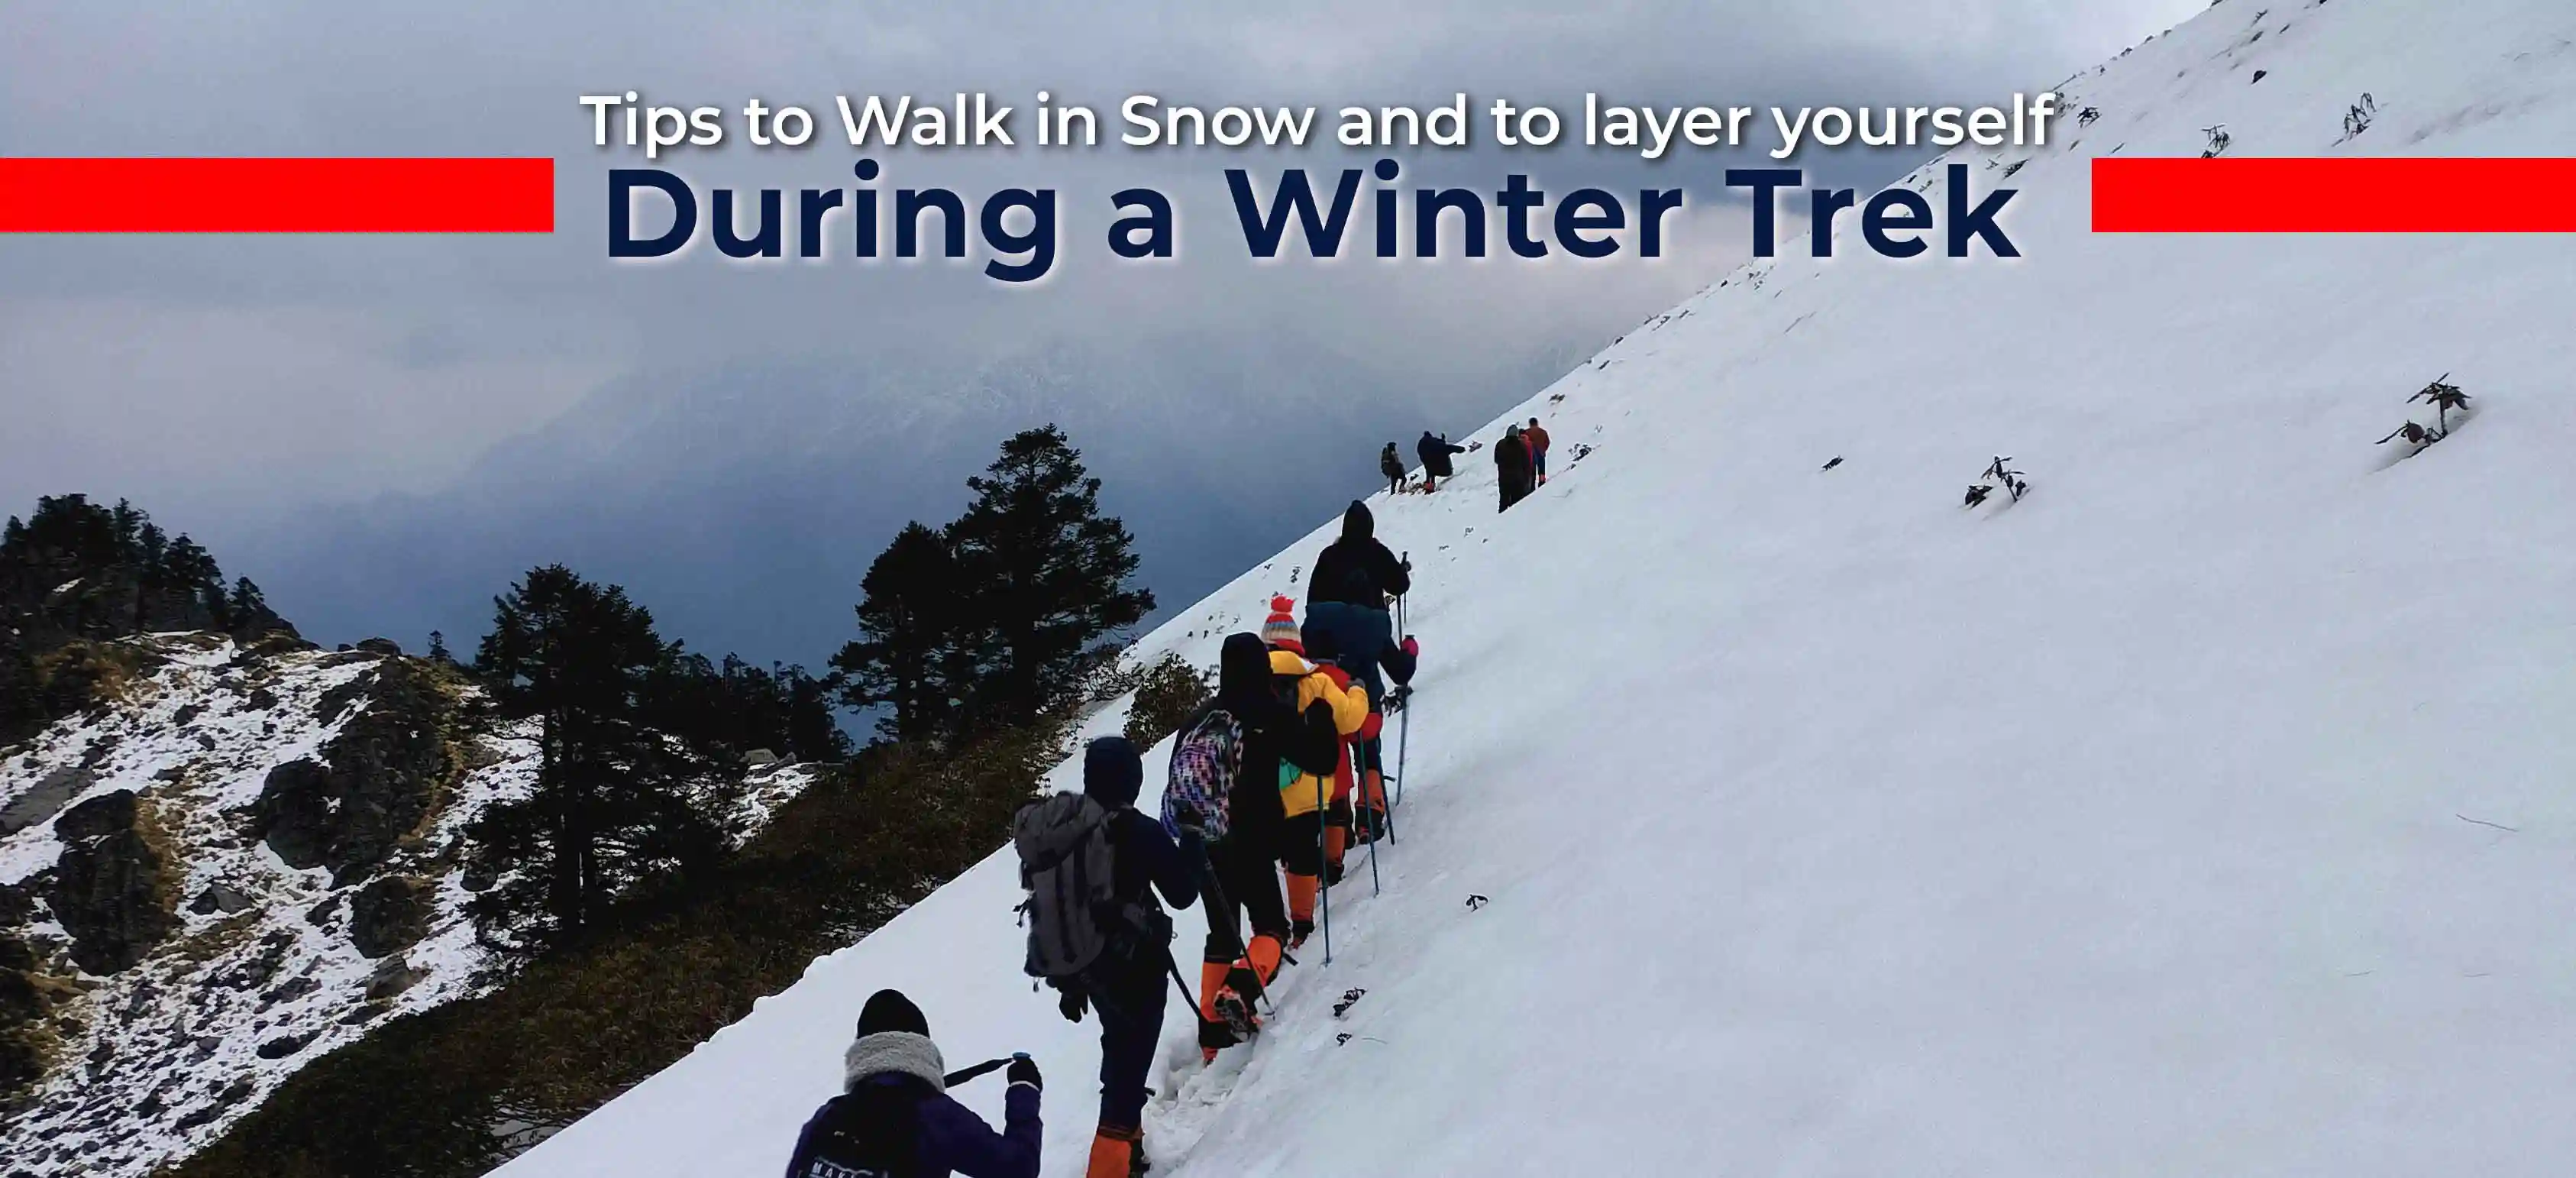 Tips to Walk in Snow and to layer yourself during a winter trek